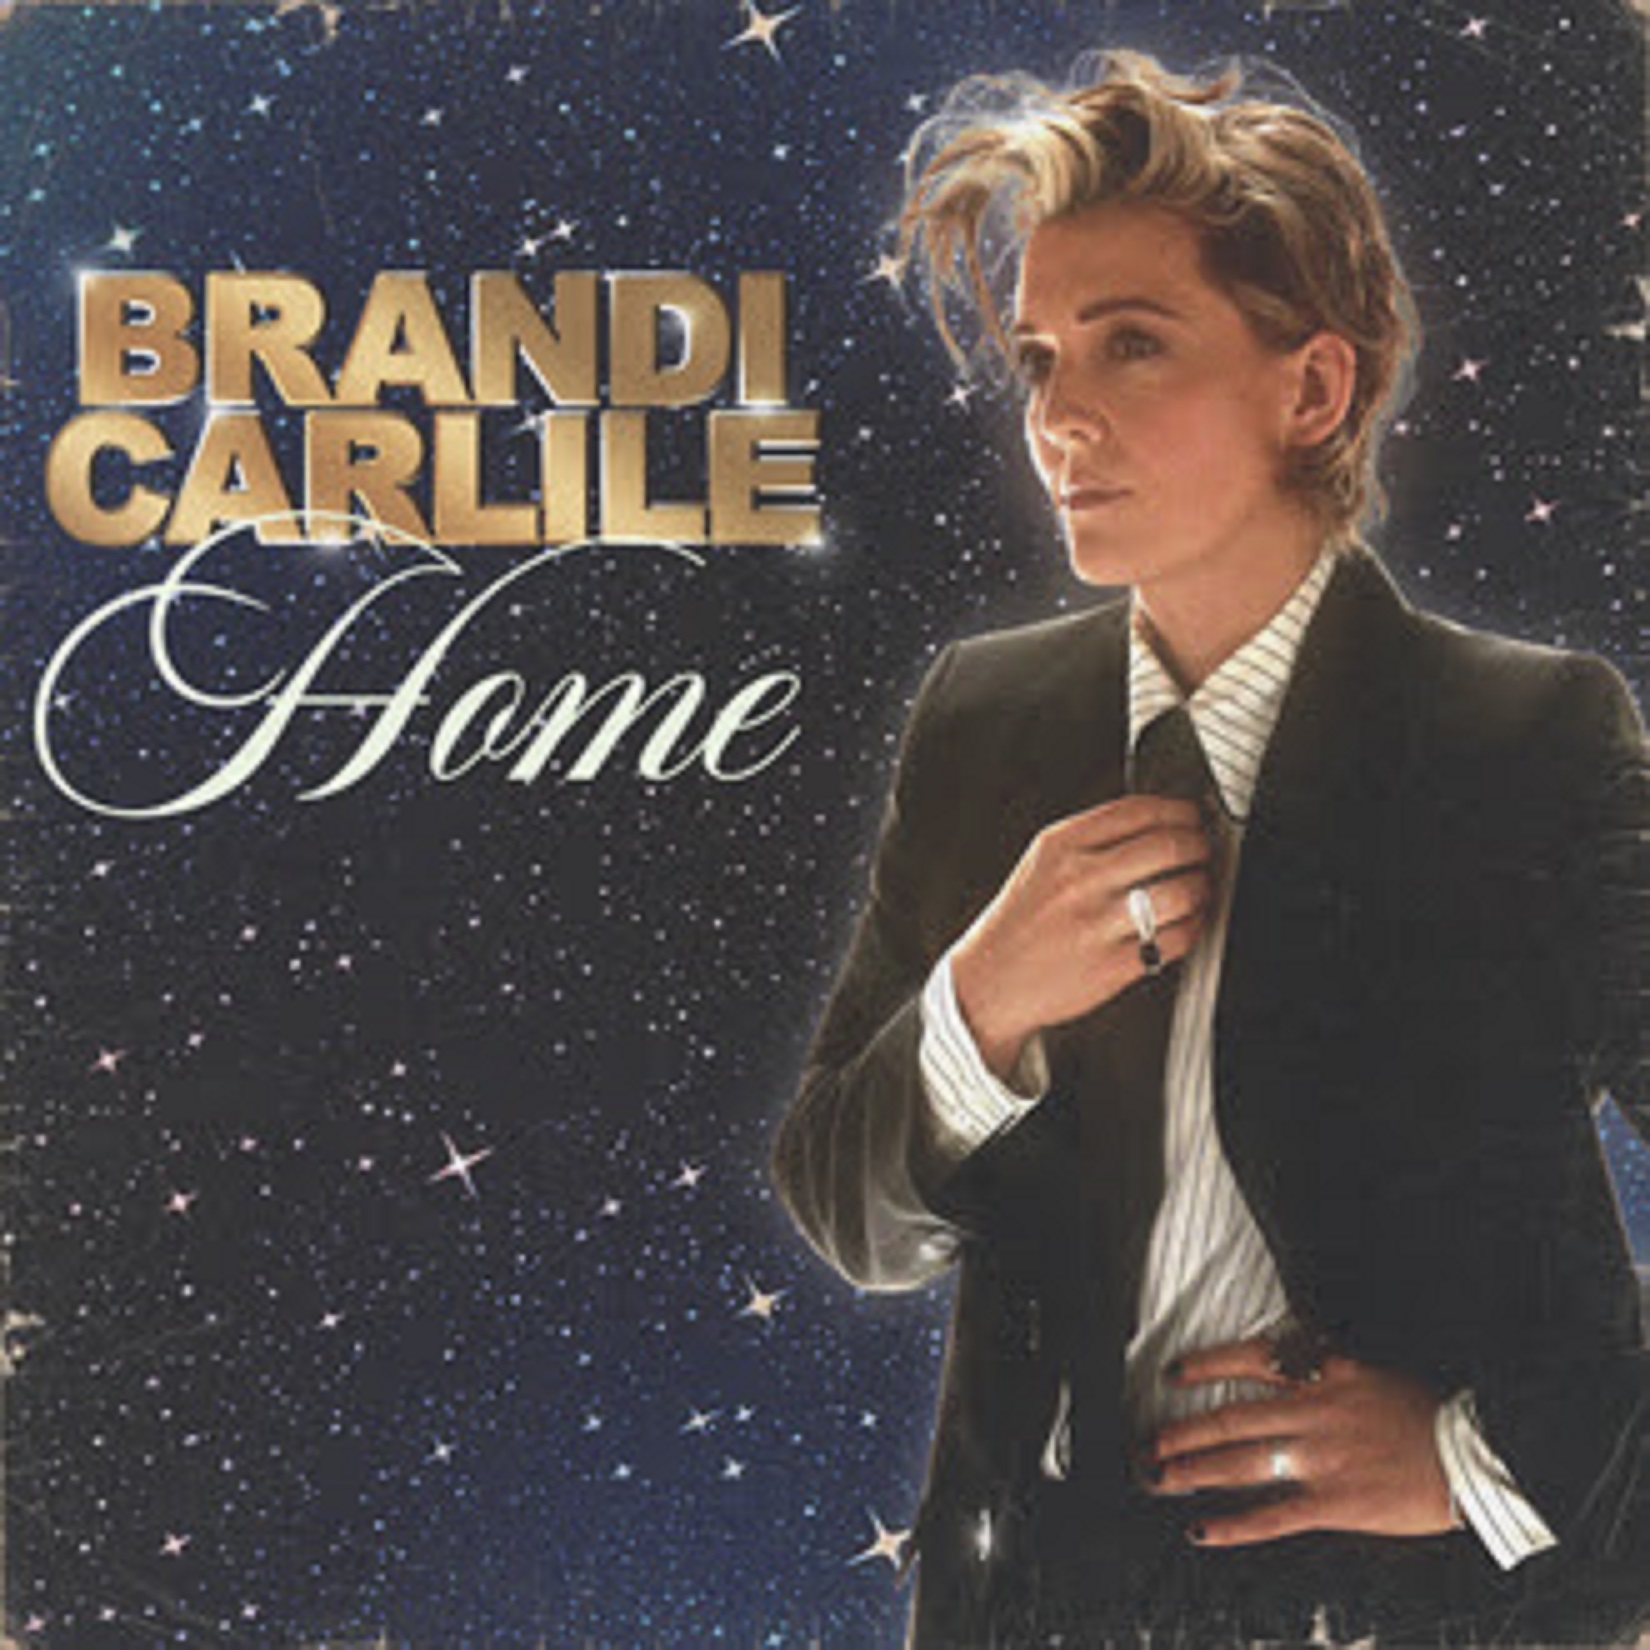 Brandi Carlile’s version of “Home” out now, featured in this week’s episode of "Ted Lasso"